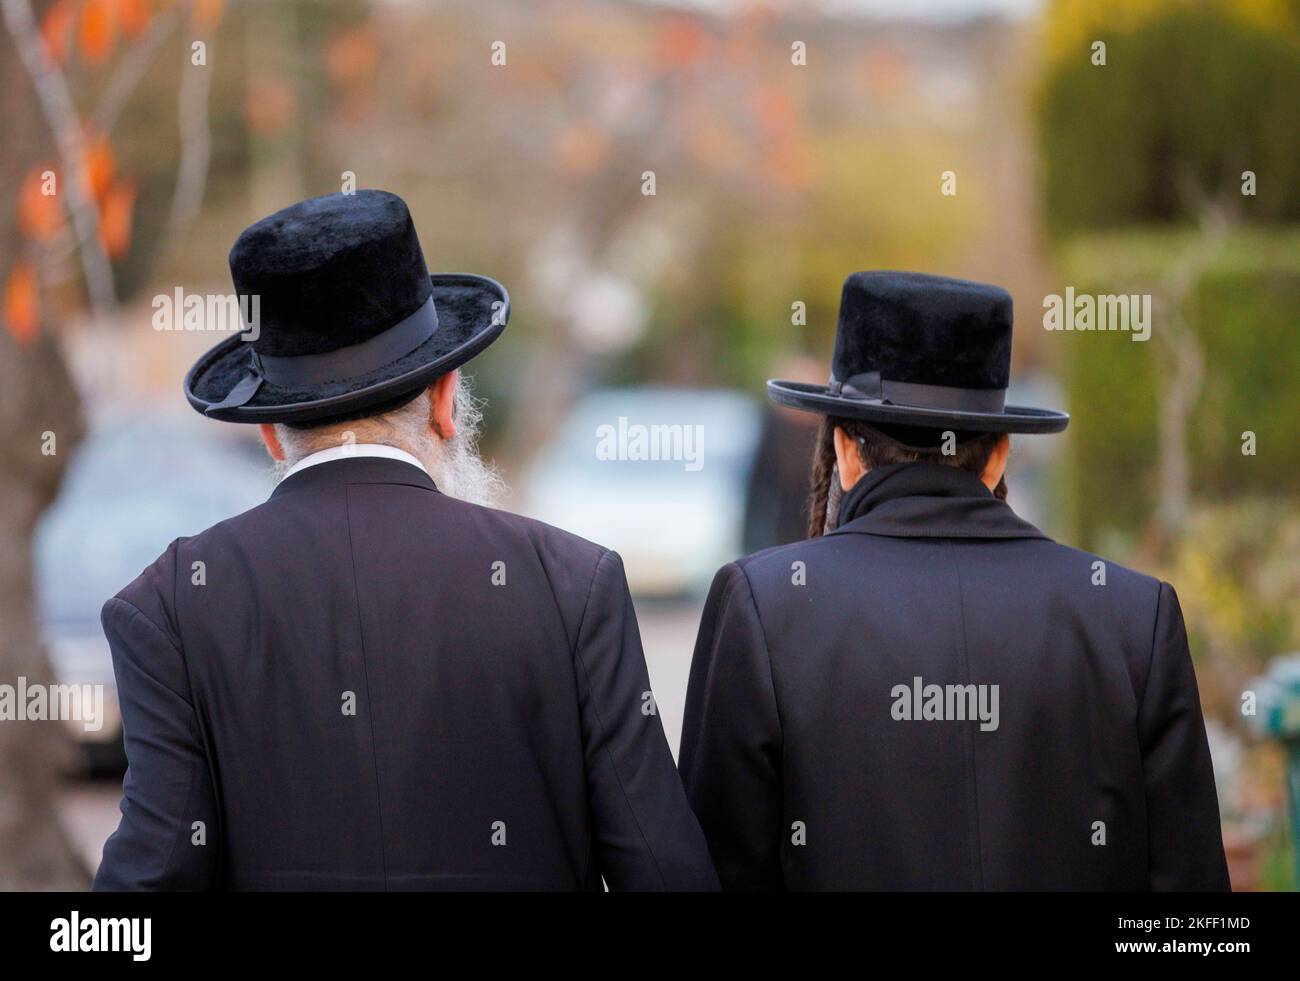 Two Jewish people walk along a road in Golders Green. Judaism is the ethnic religion of the Jewish people who descend from the Israelities and Hebrews. Stock Photo